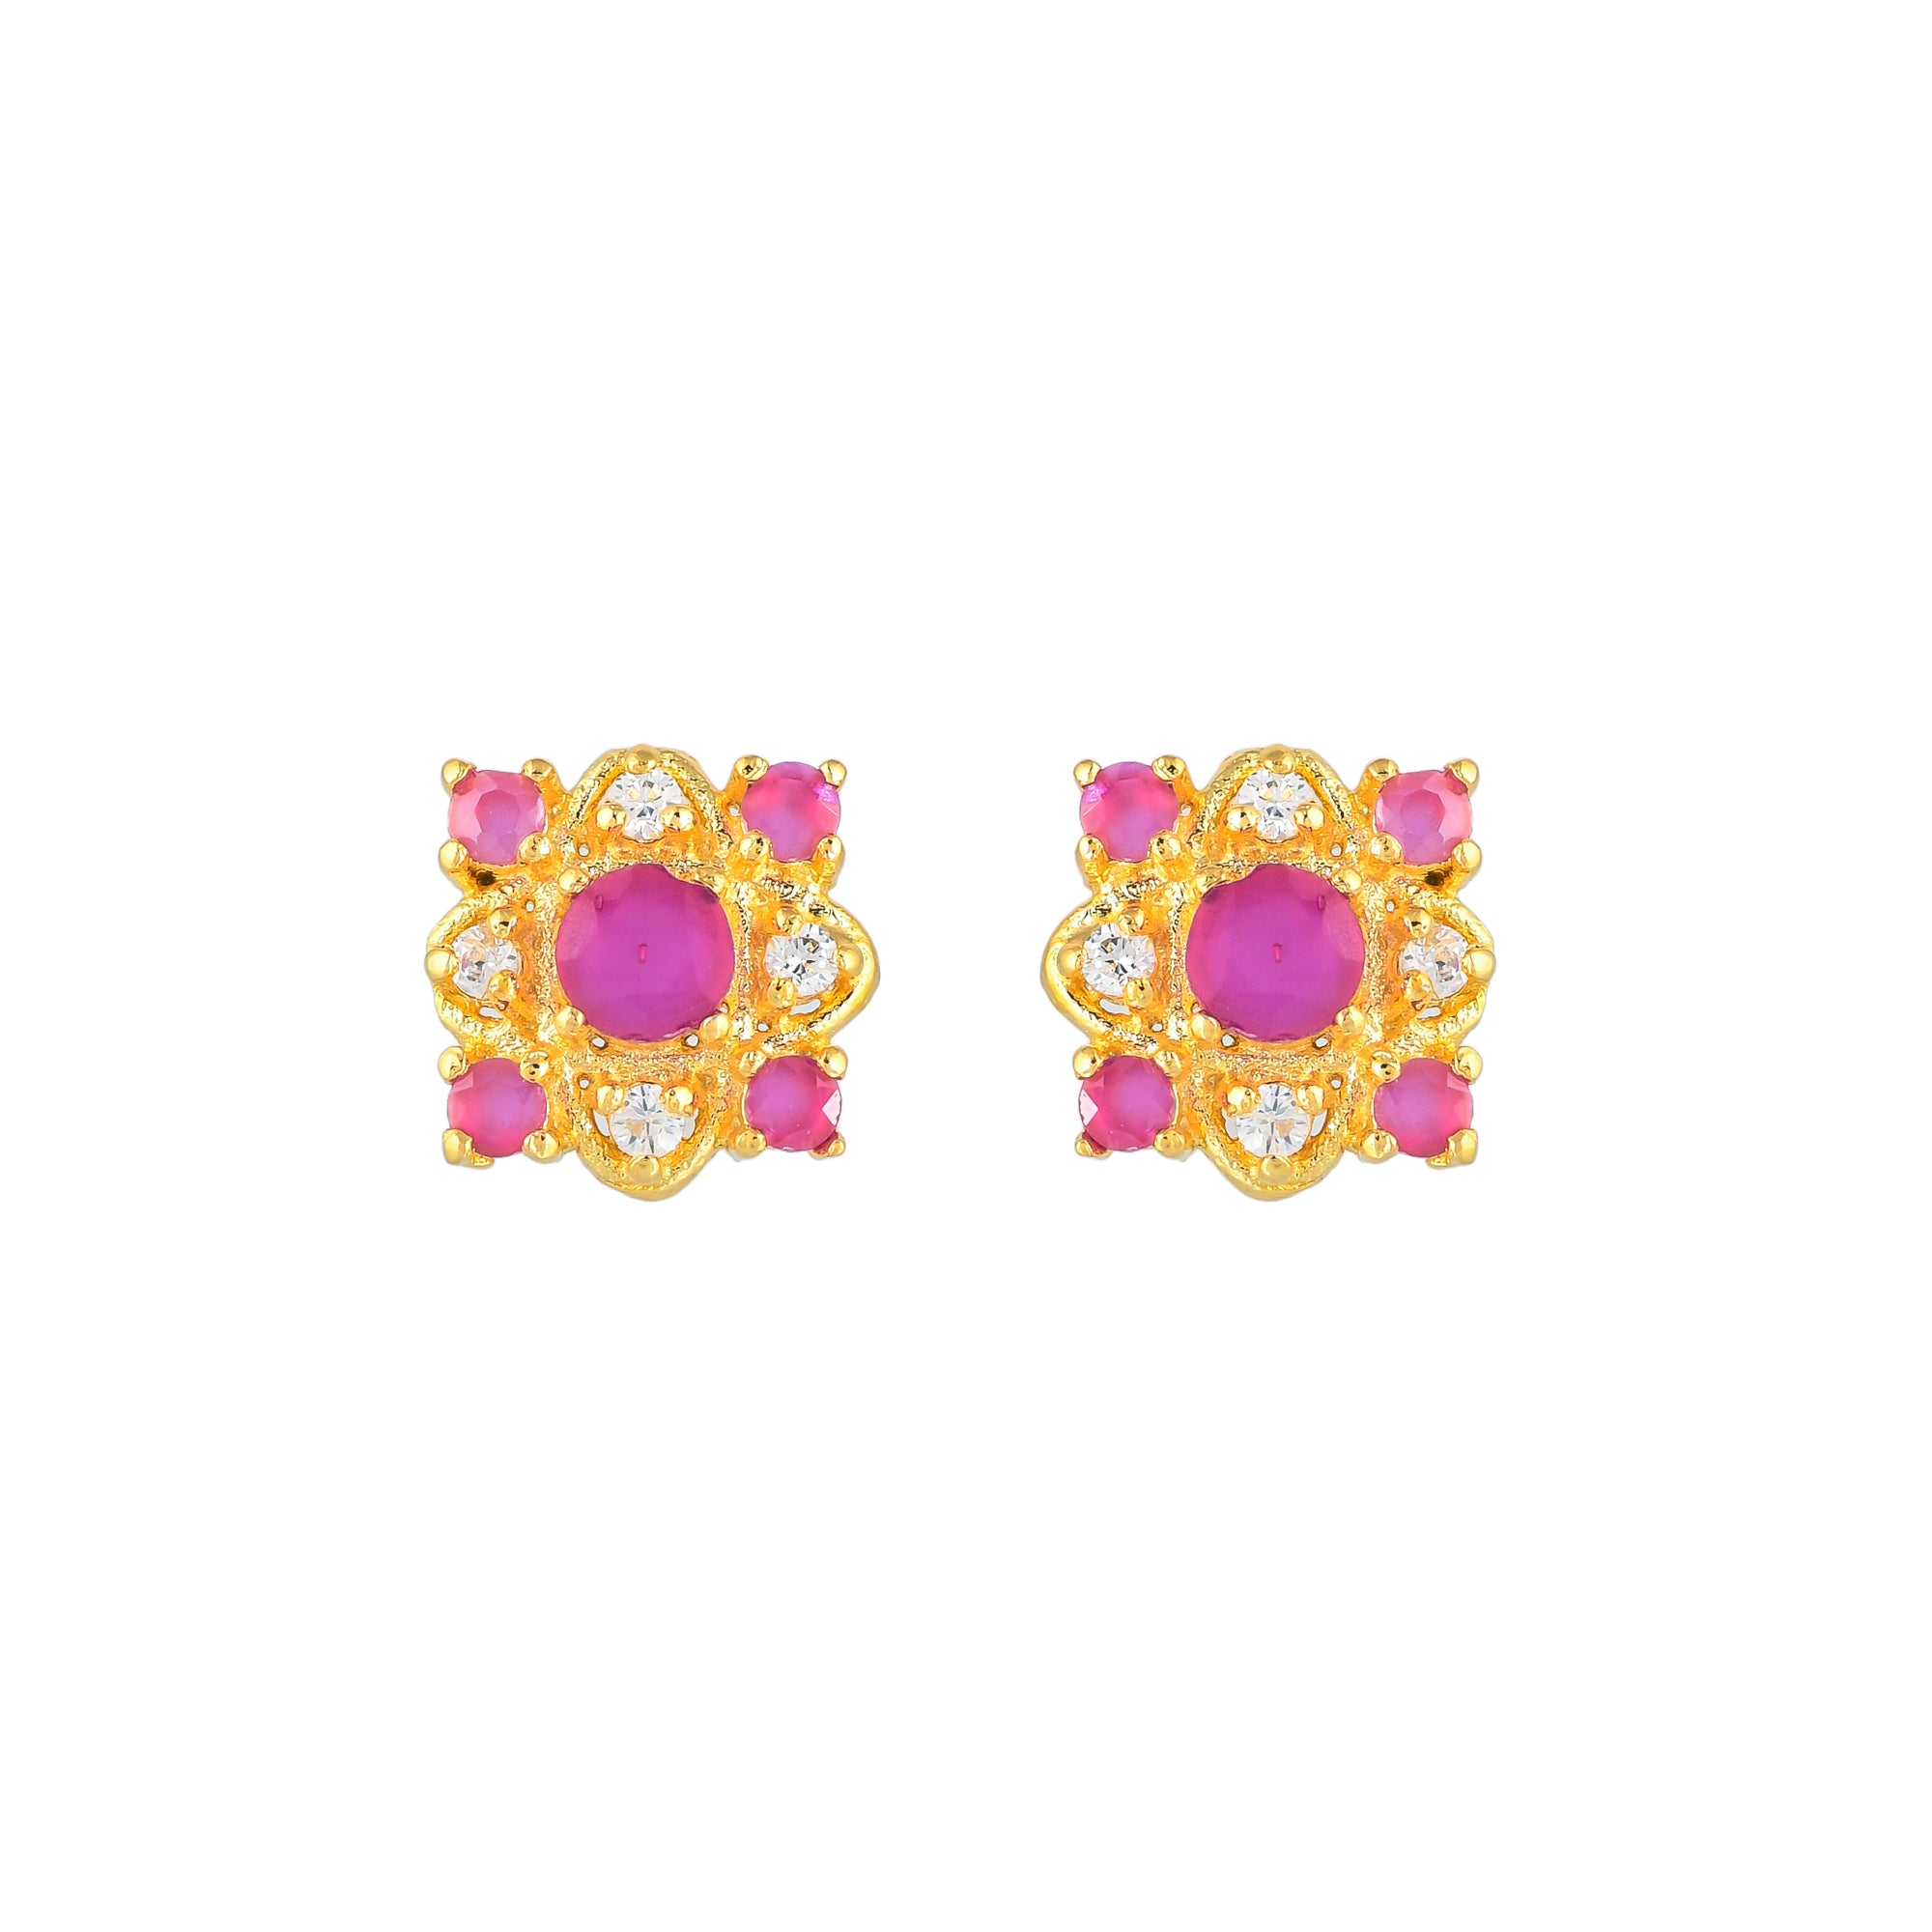 Sparkling Essentials White and Pink CZ Gems Stud Earrings